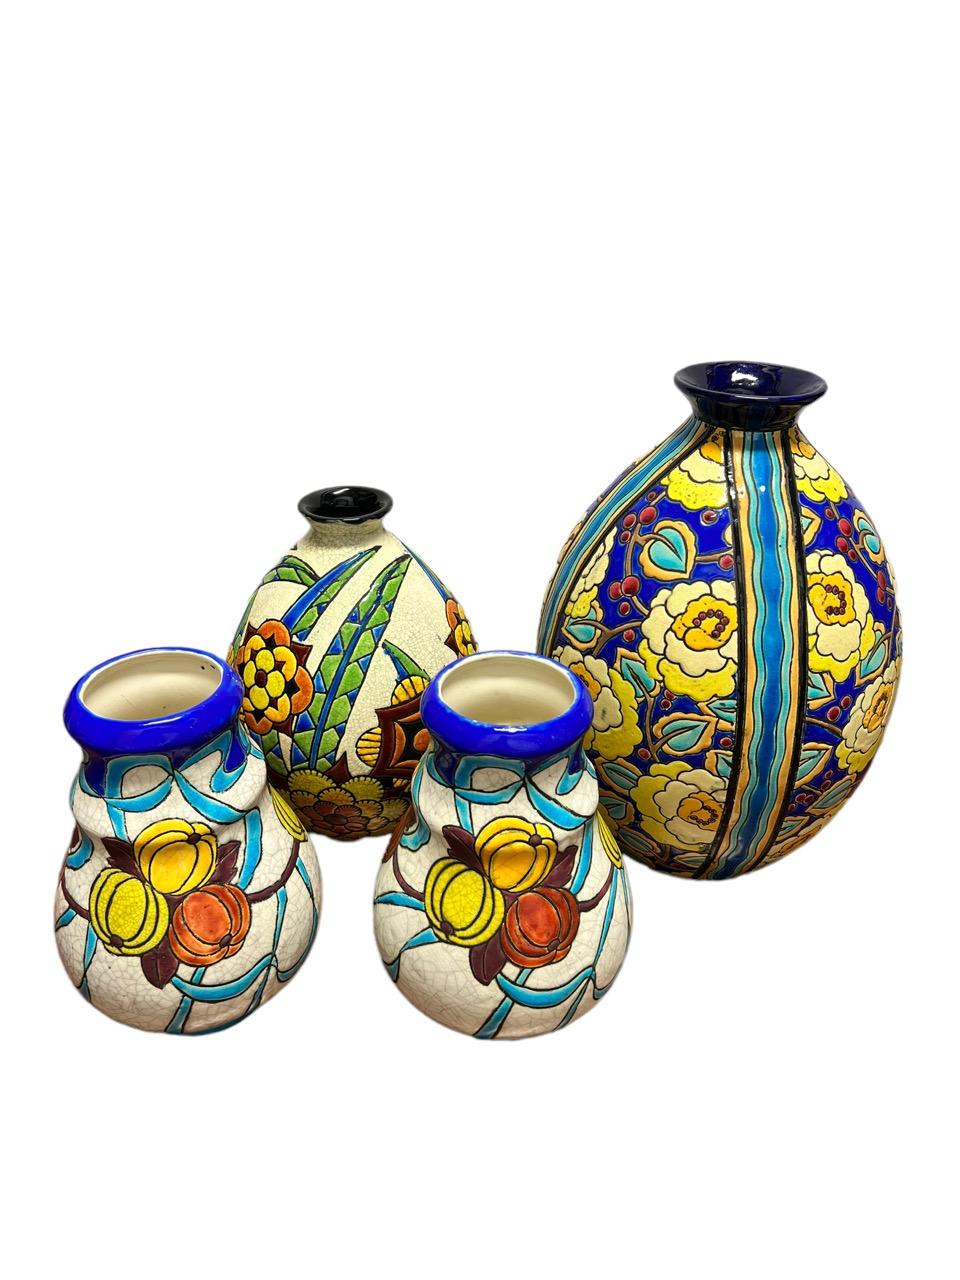 Art Deco Group of Four 1920s Floral Vases by Artist Charles Catteau